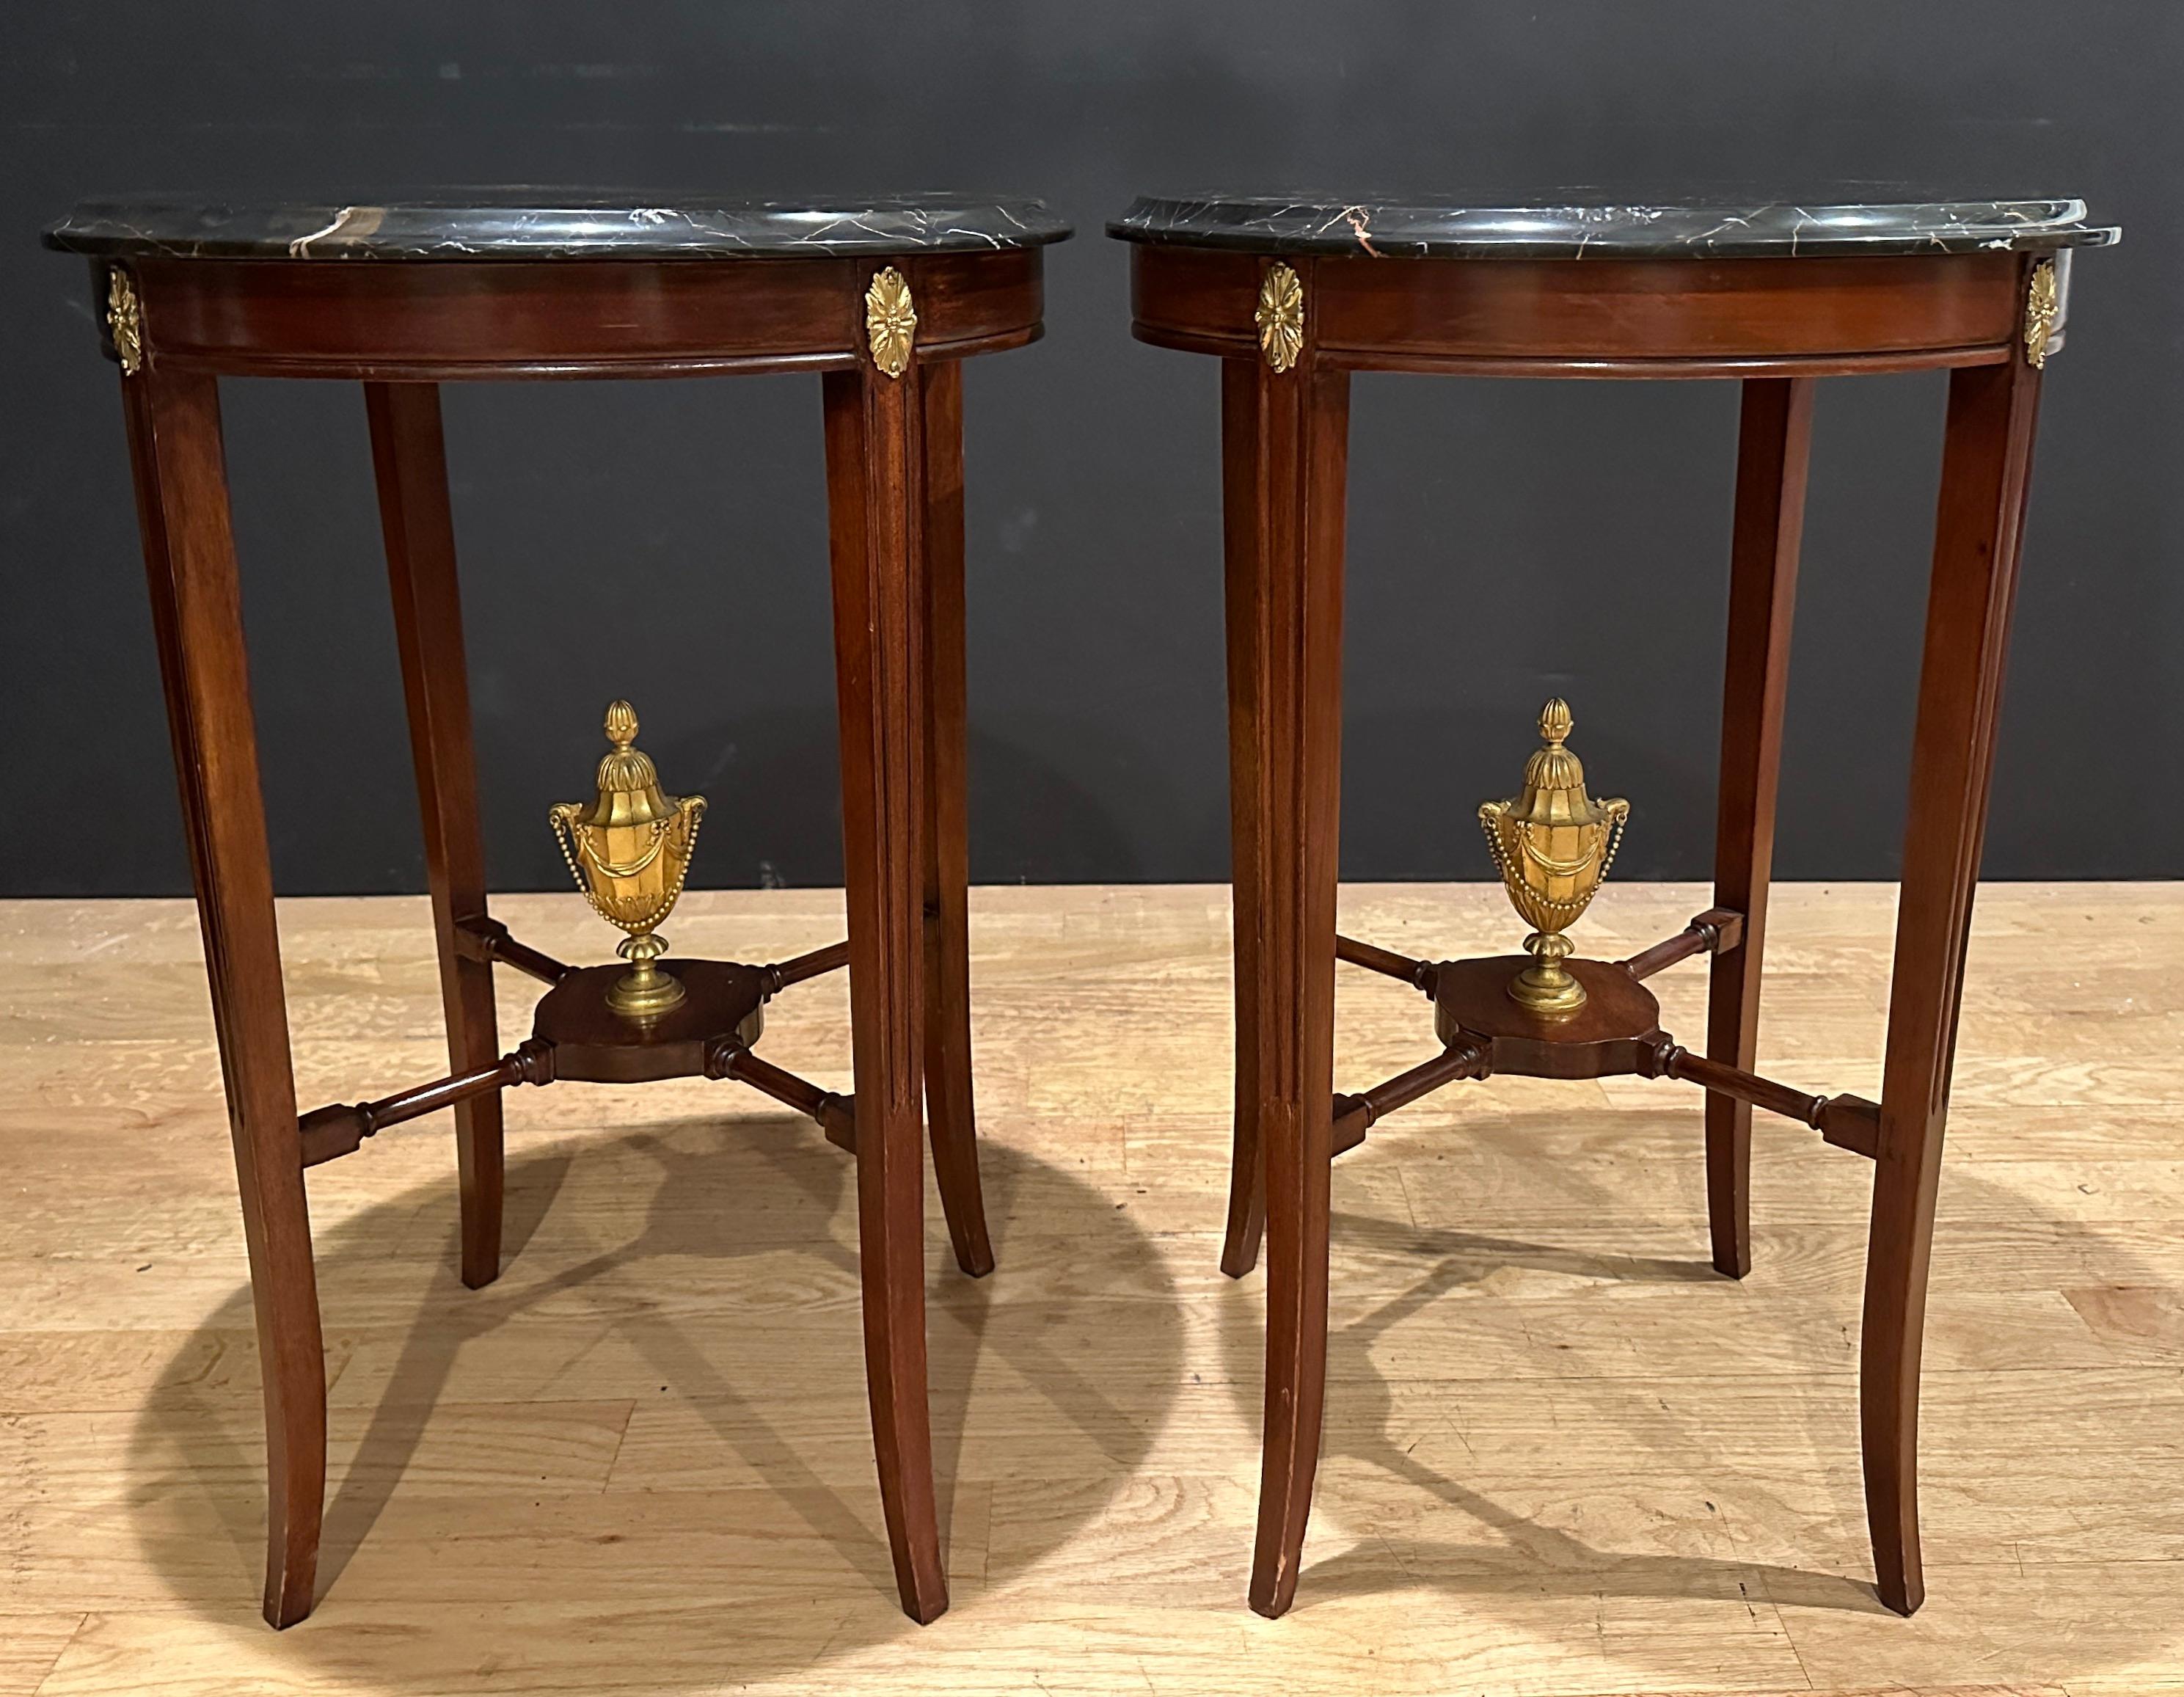 Fine quality, tailored and elegant pair of black variegated marble top bronze mounted end/side tables. Bottom stretcher mounted with bronze urns drapped with bows and ribbon, side chains and topped with acorn finials.